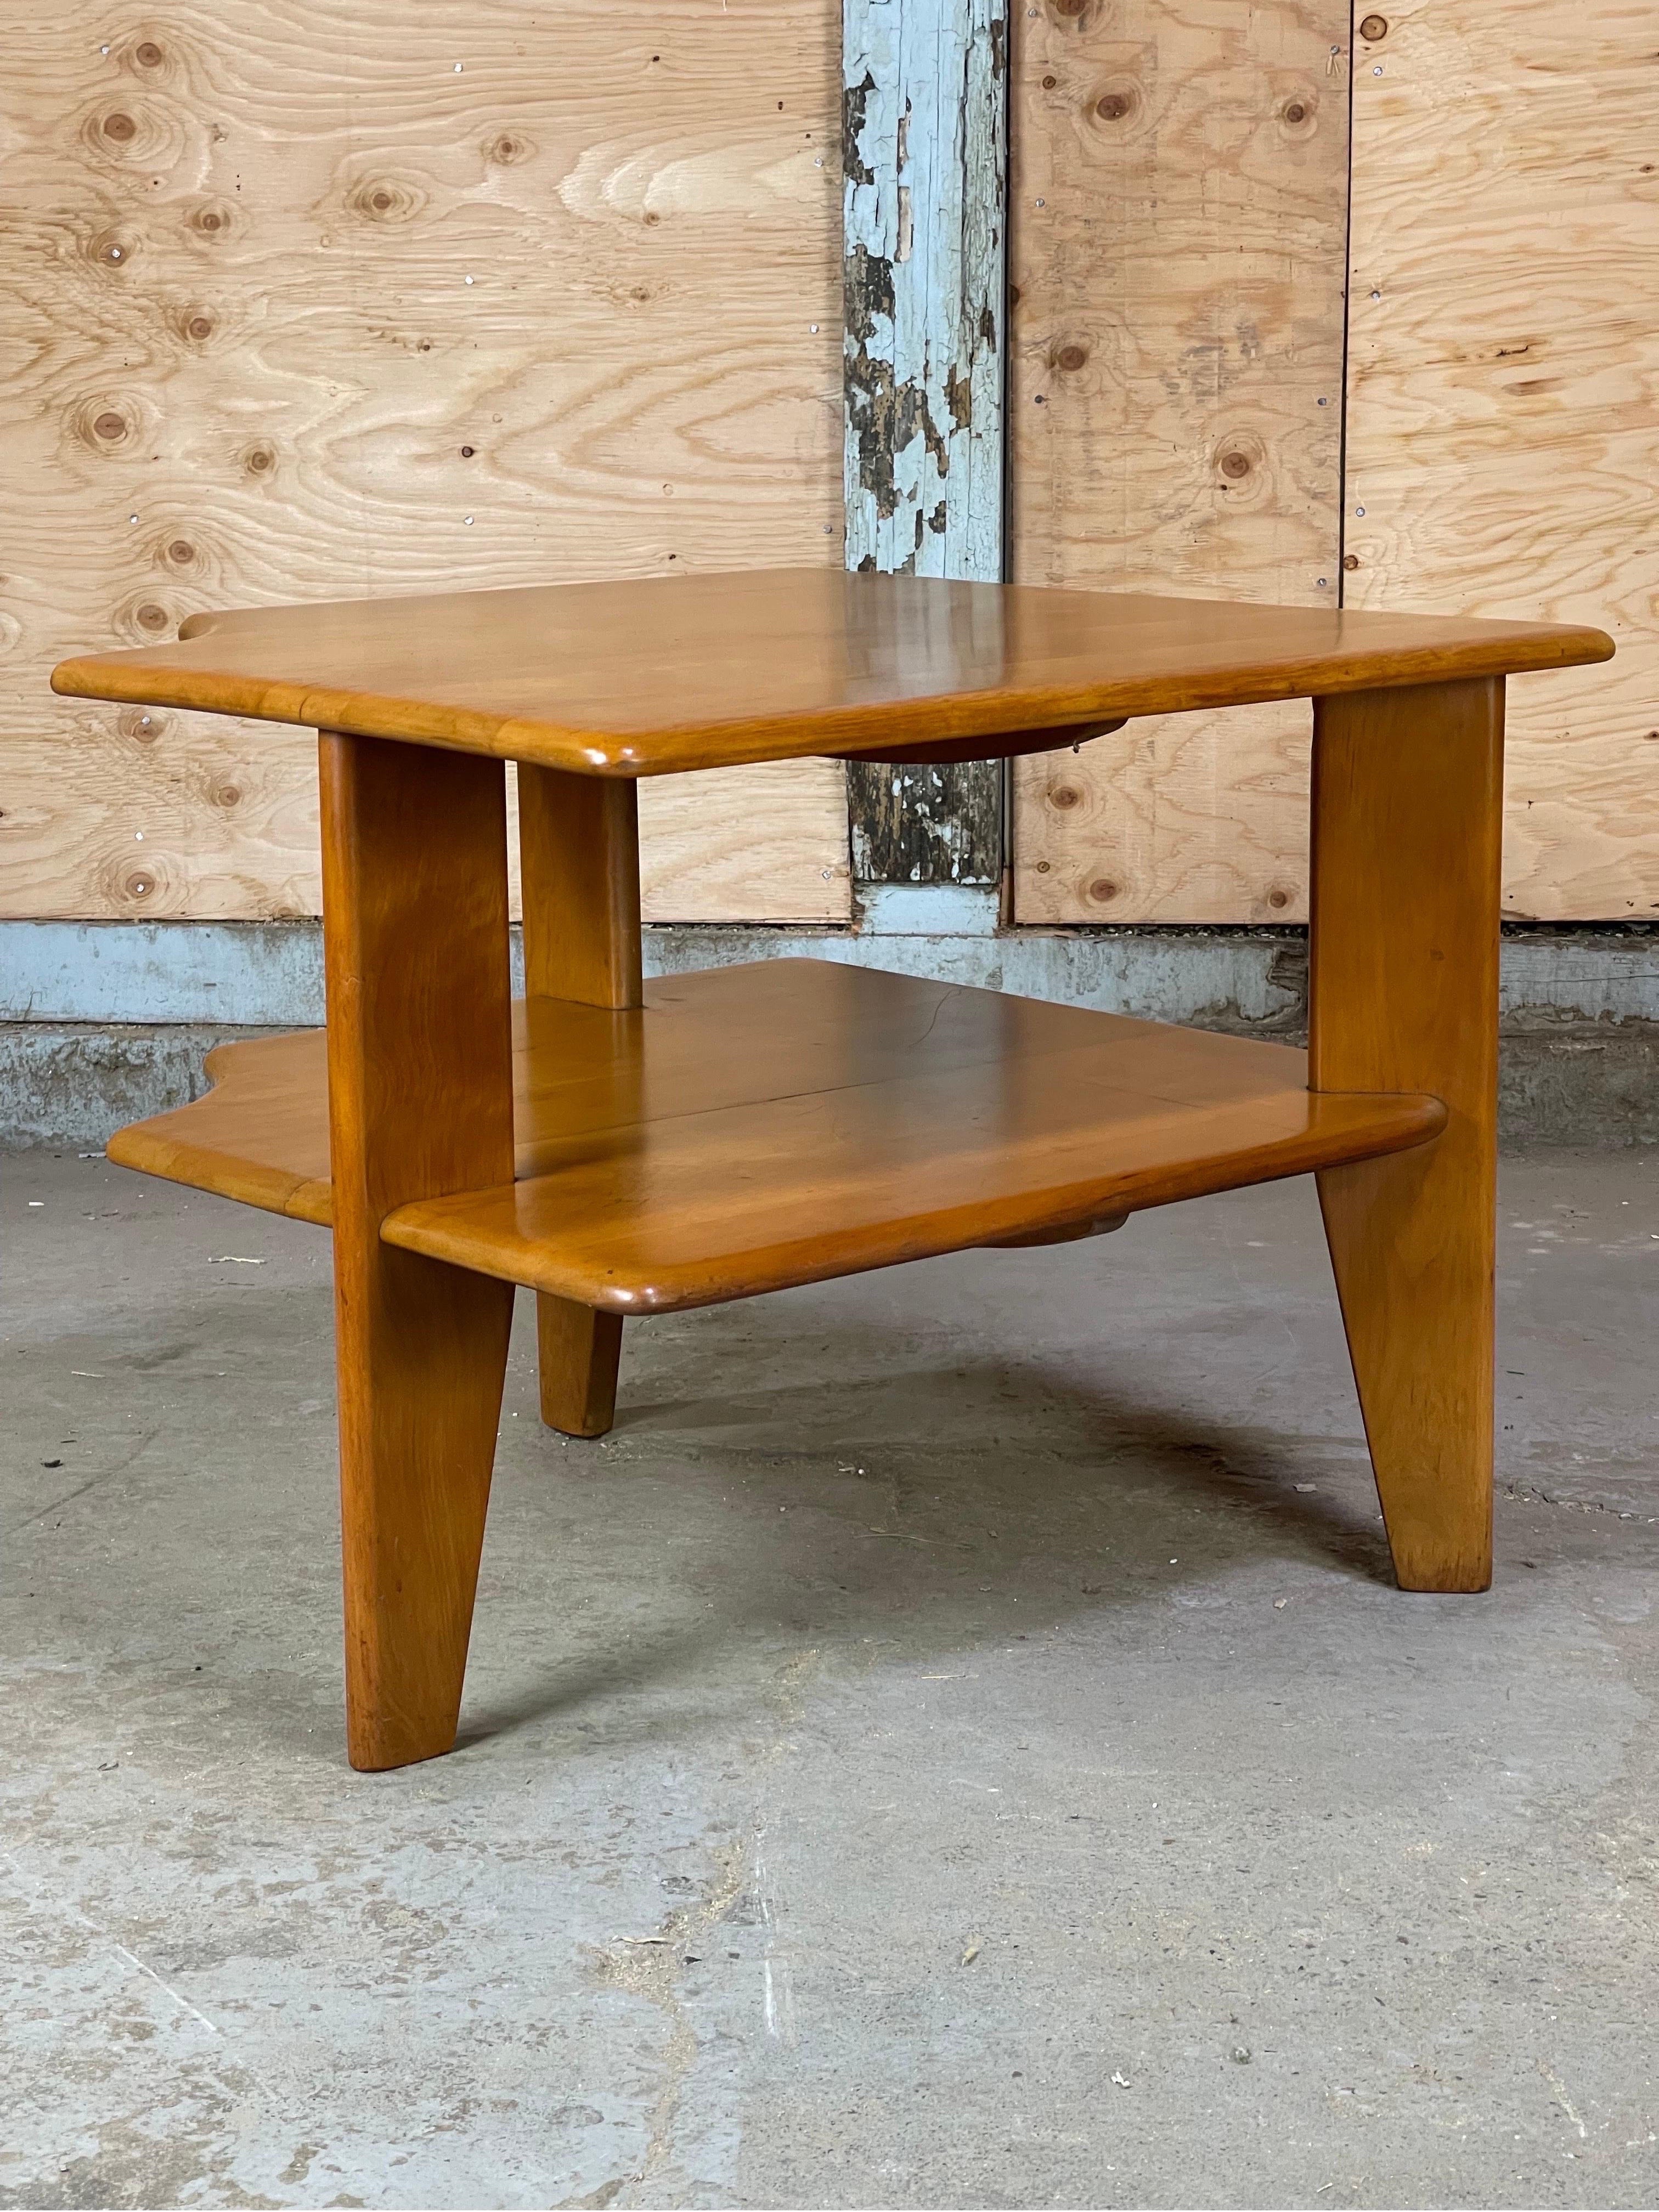 Hard-to-find corner/lamp table by Russel Wright for Conant Ball. Excellent use of form and solid maple. Some wear throughout but still displays wonderfully - please see pics. 
*Please request via message for a reduced cost shipping quote with your